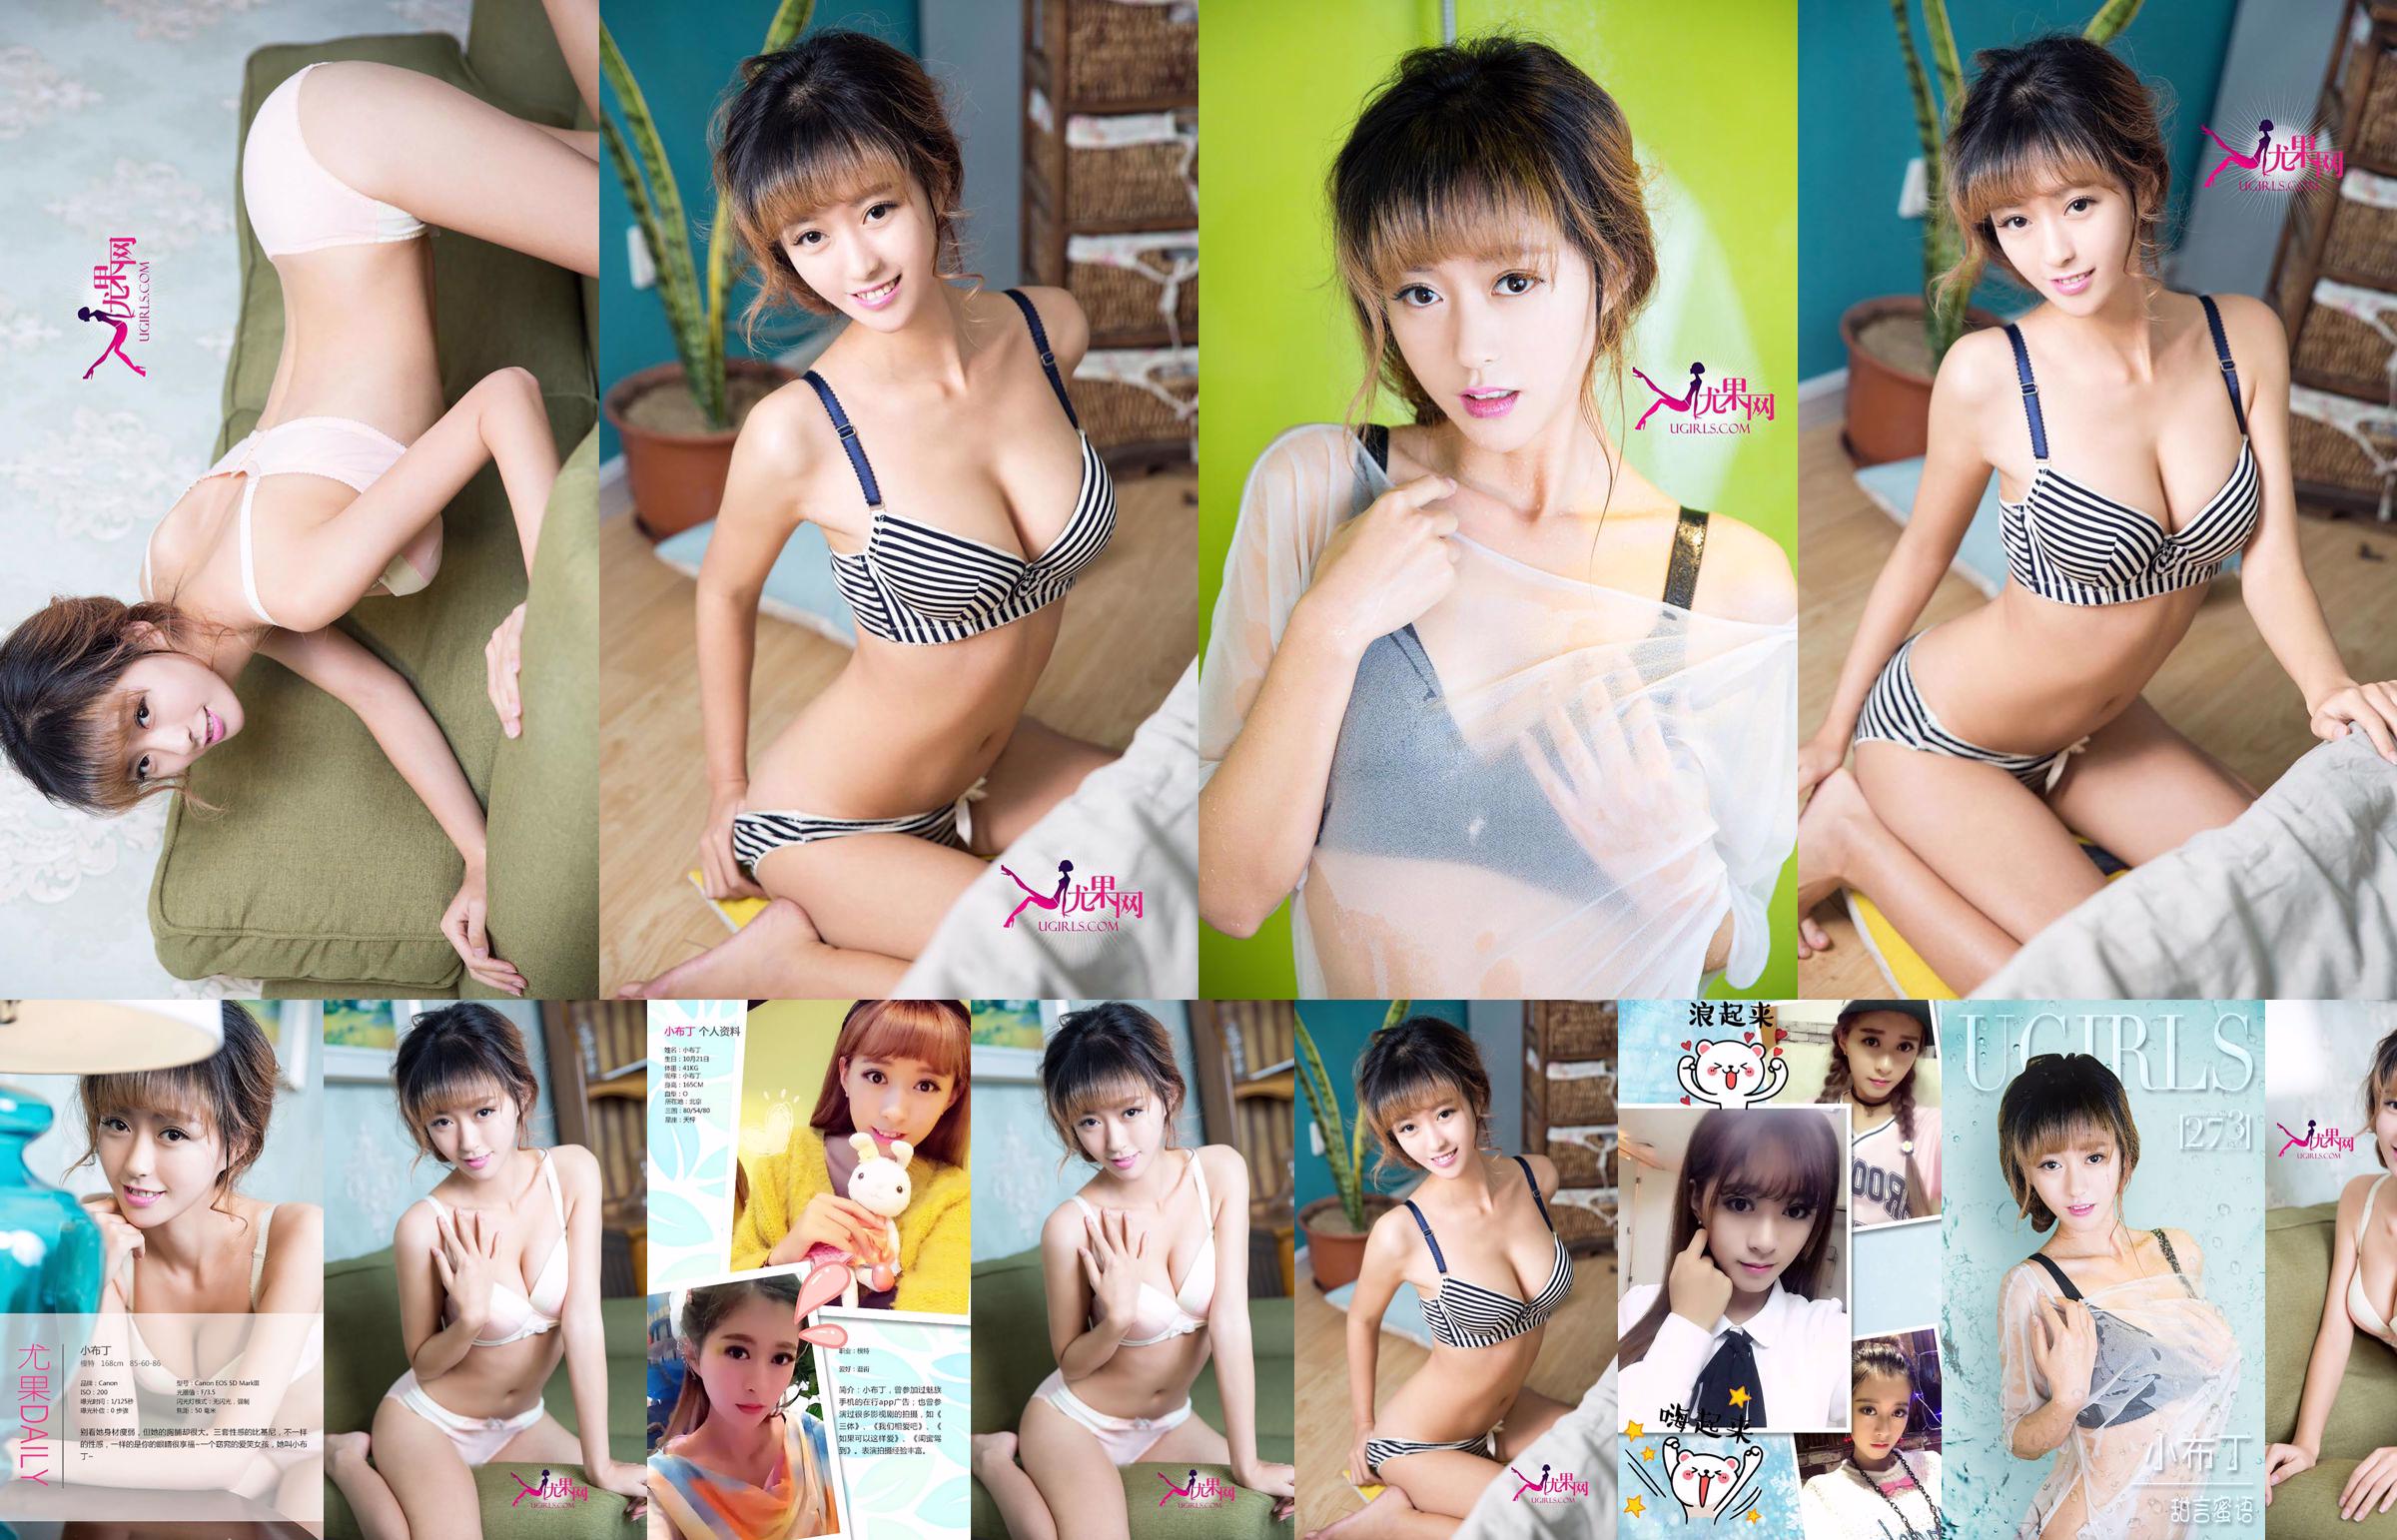 You Unana "Red Underwear + Swimsuit + One-piece Stockings" [Green Beans Guest] No.64e366 Page 1